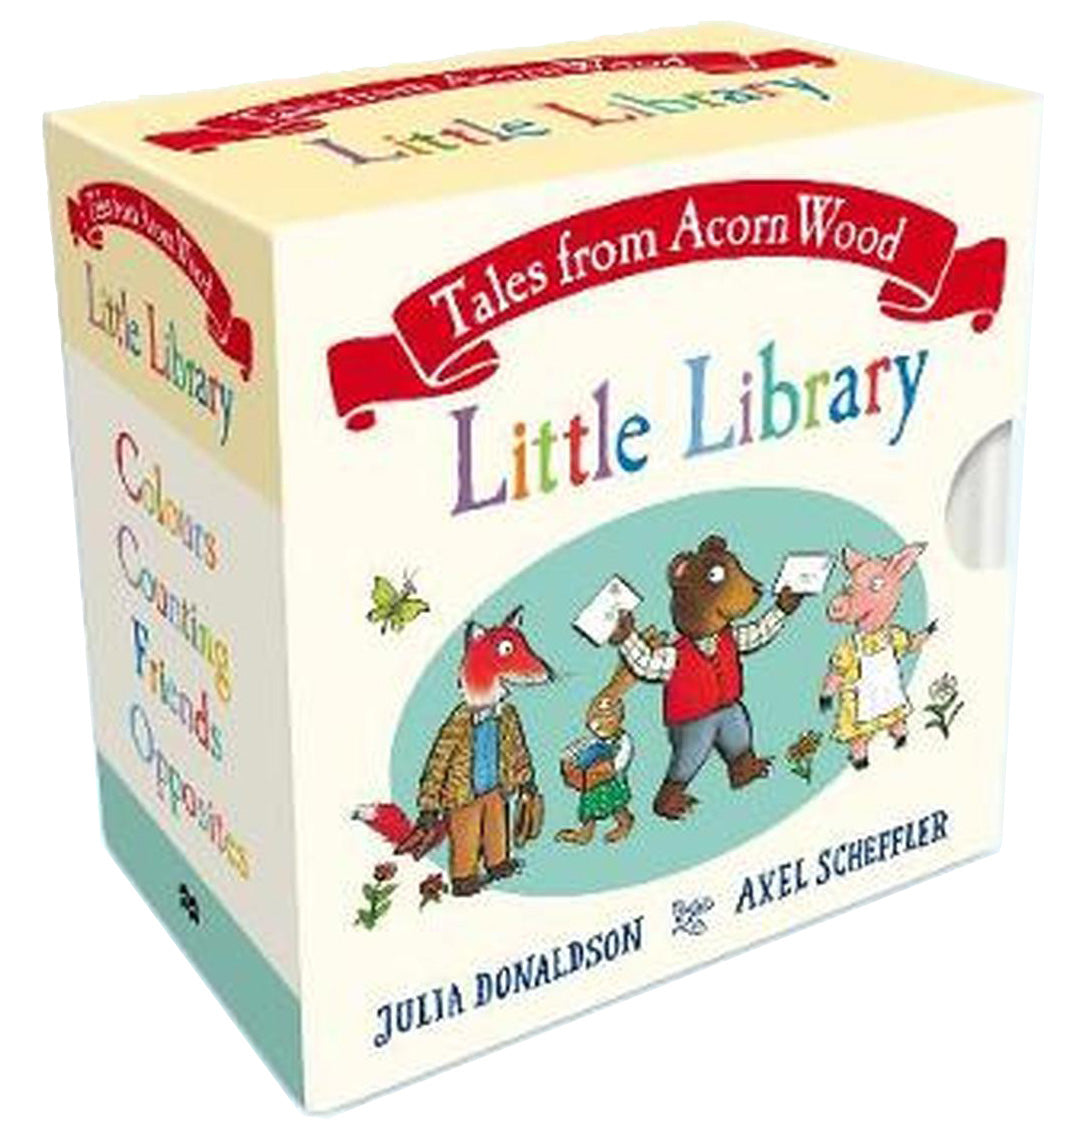 Tales from Acorn Wood Little Library